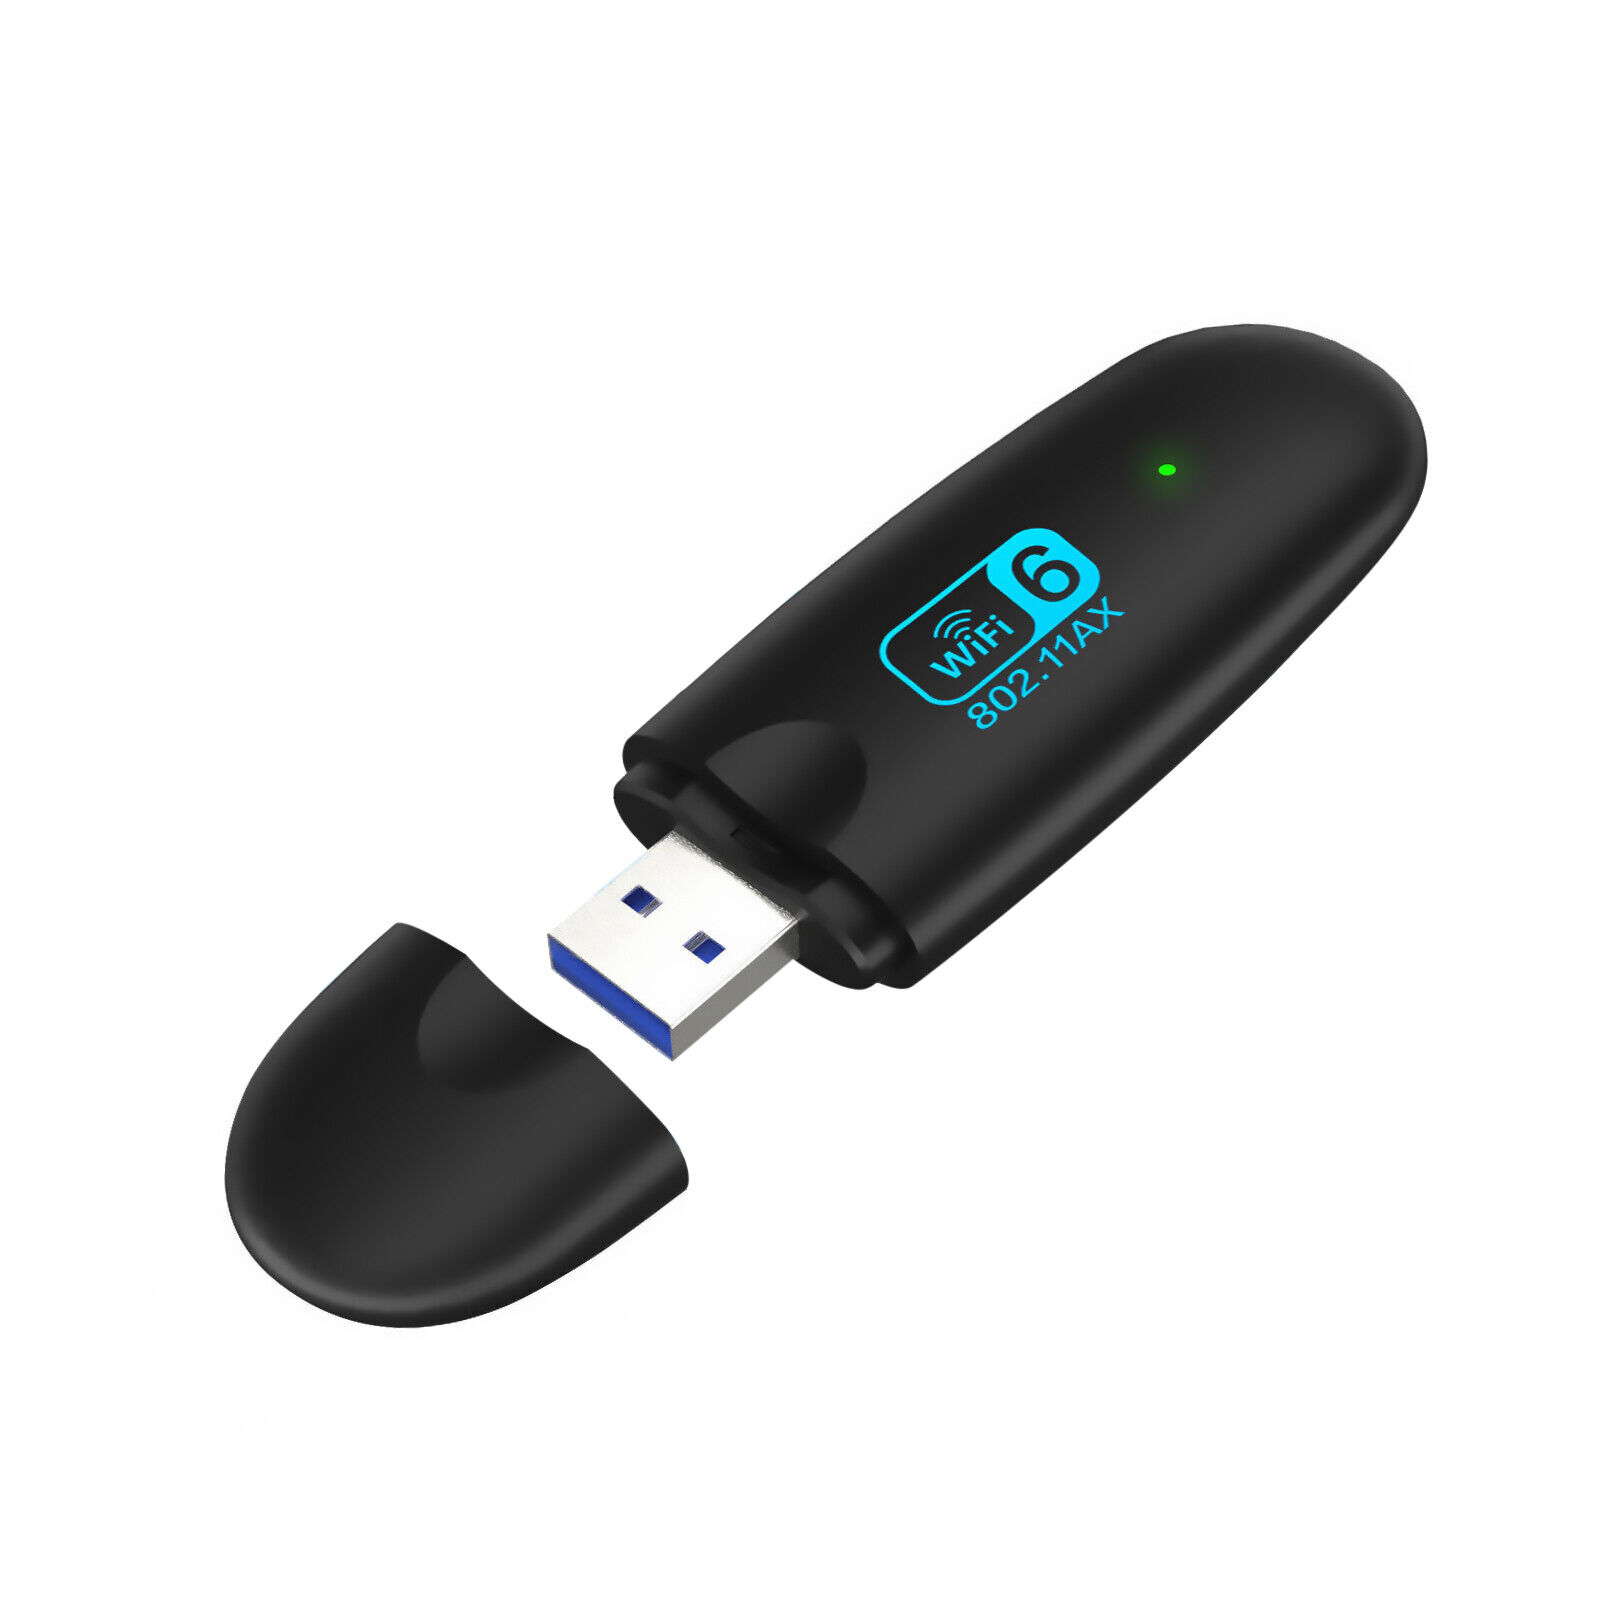 2.4G/5G High Speed WiFi6 Dual Band Wireless USB 3.0 WiFi Adapter Portable Dongle